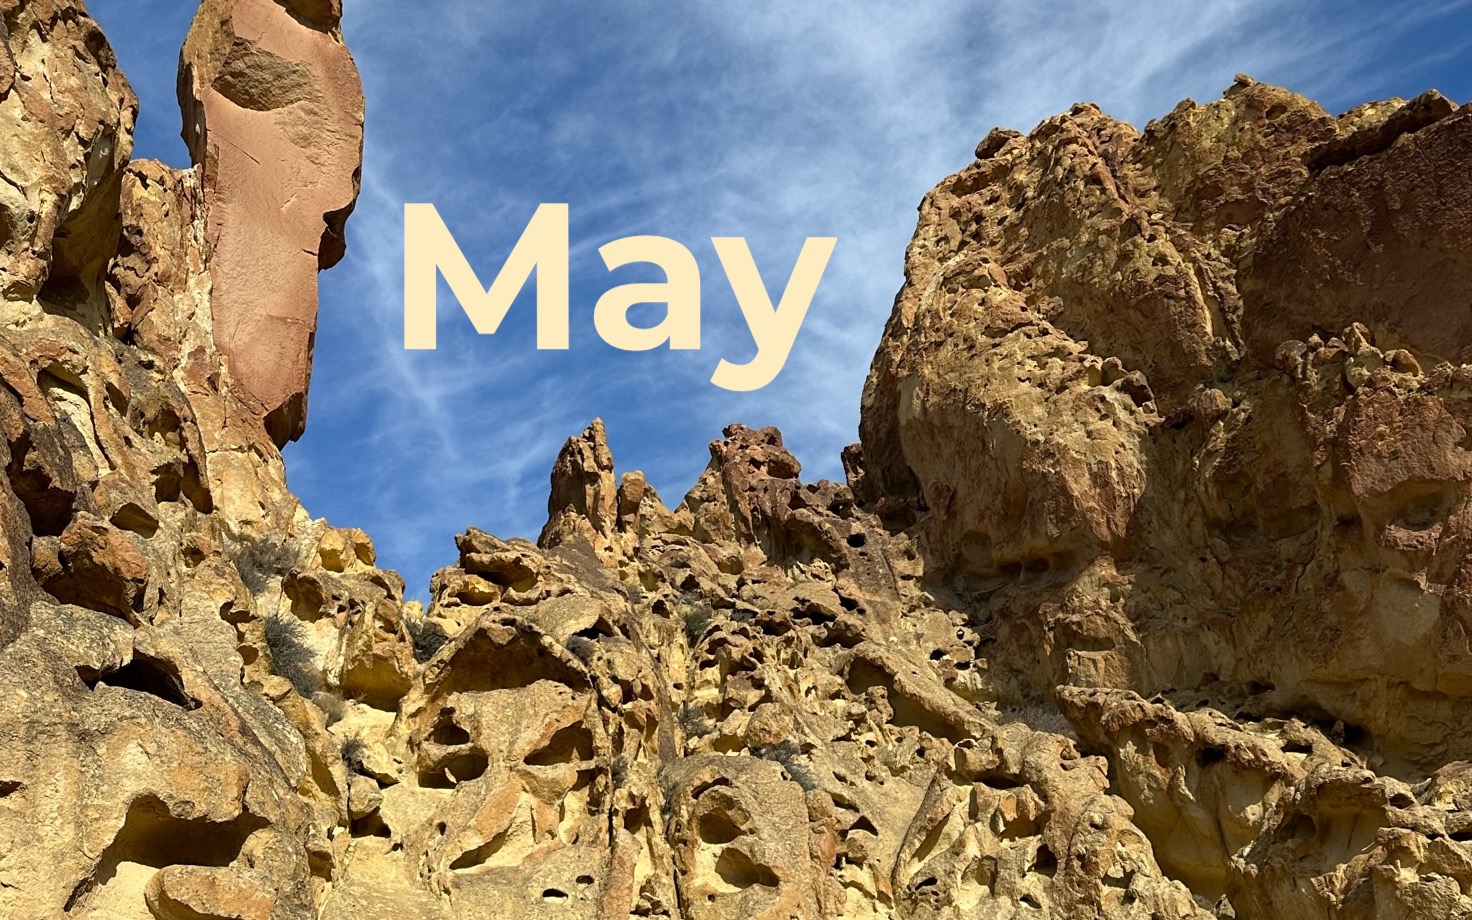 A rocky landscape of Oregon with blue sky behind and the word "May".